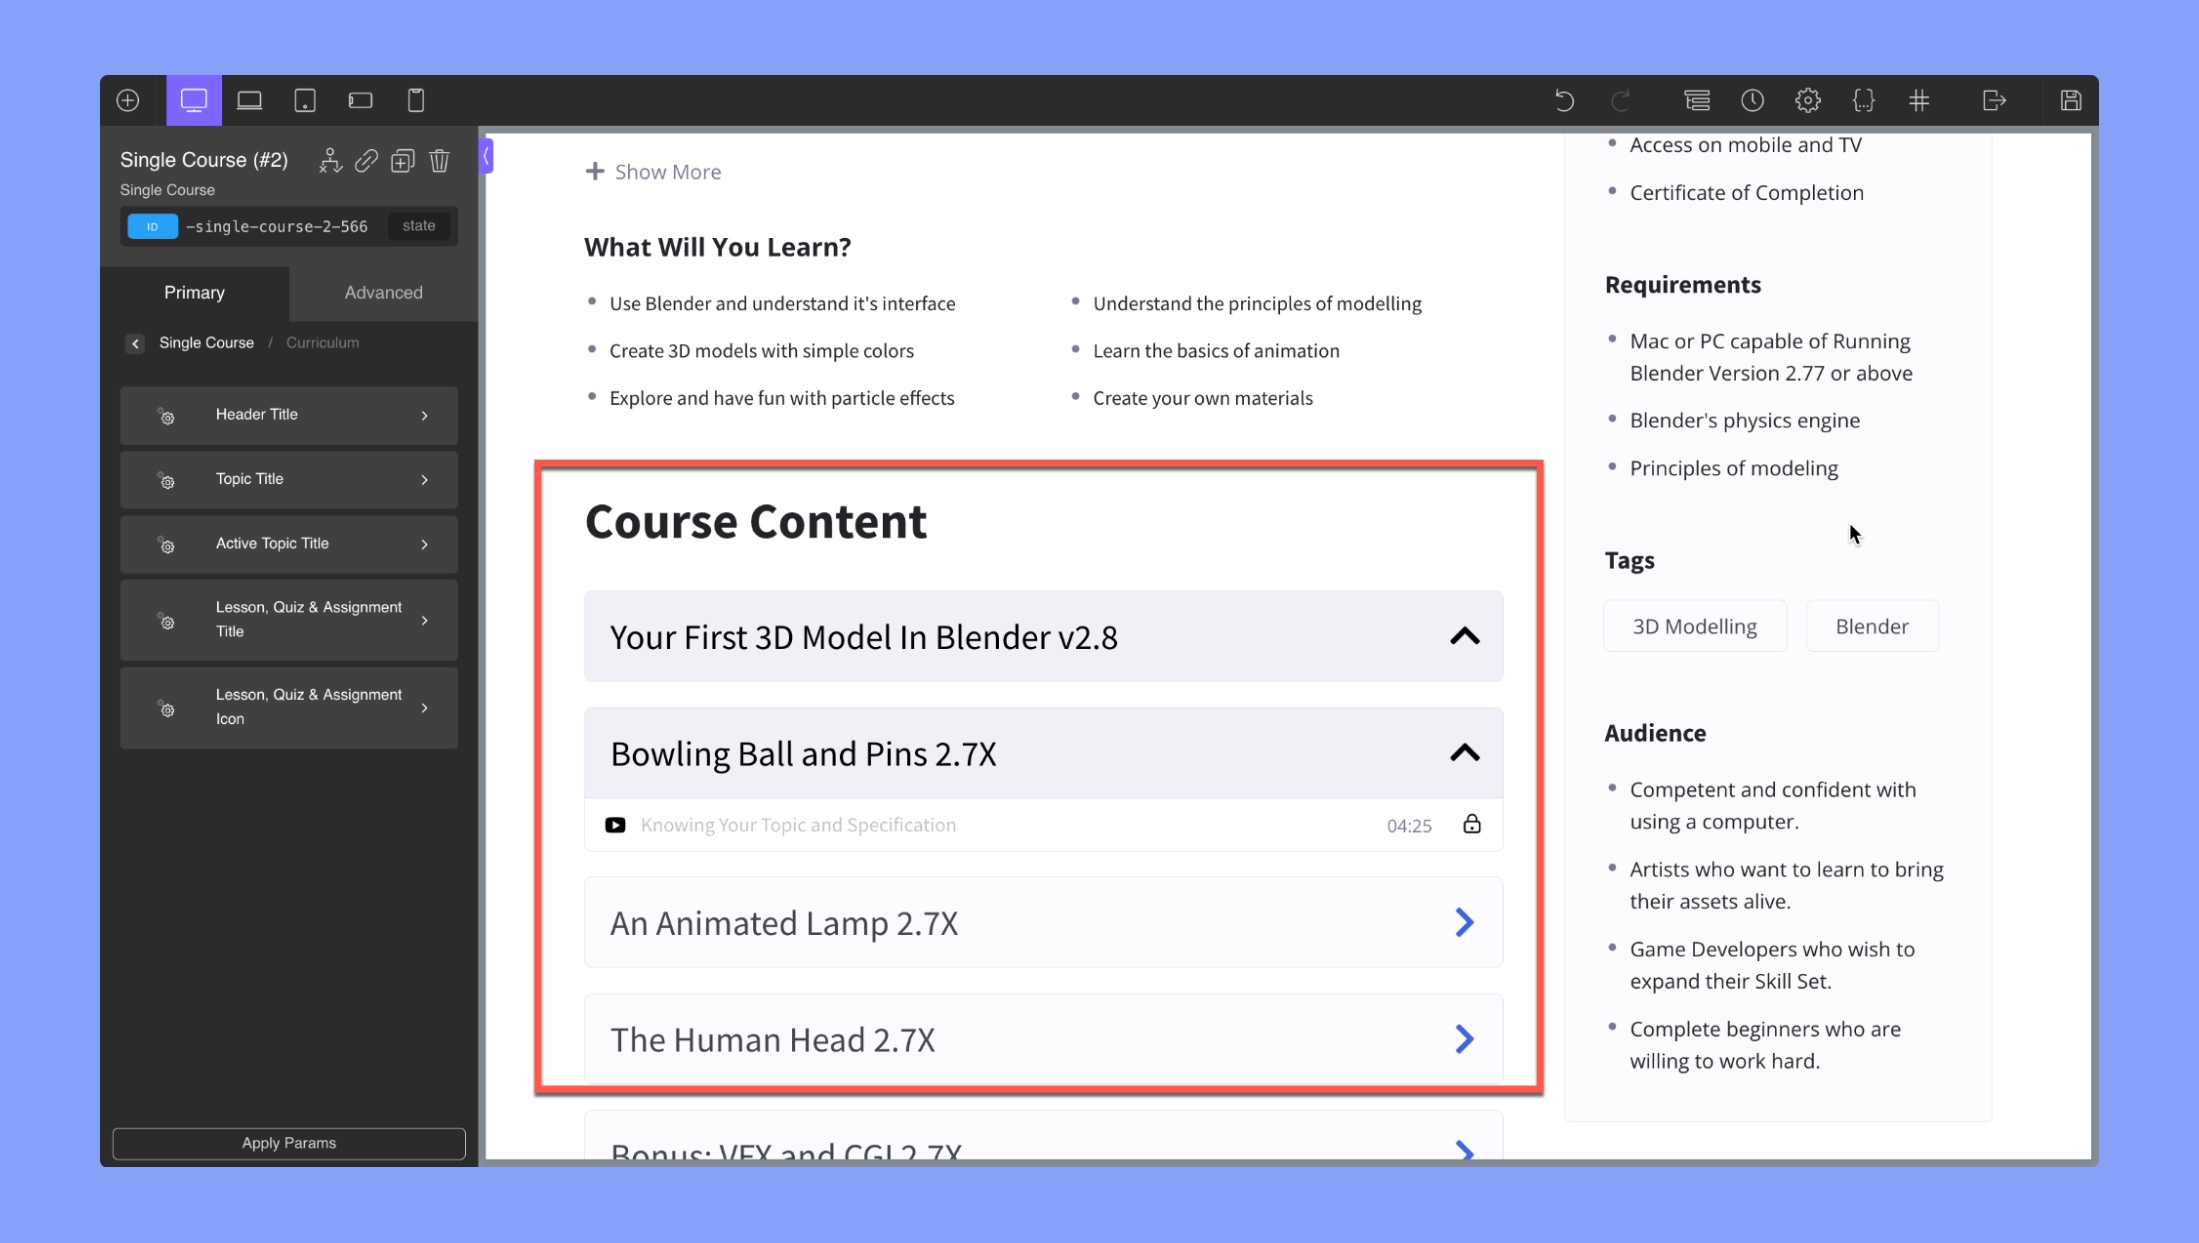 Adding course content section